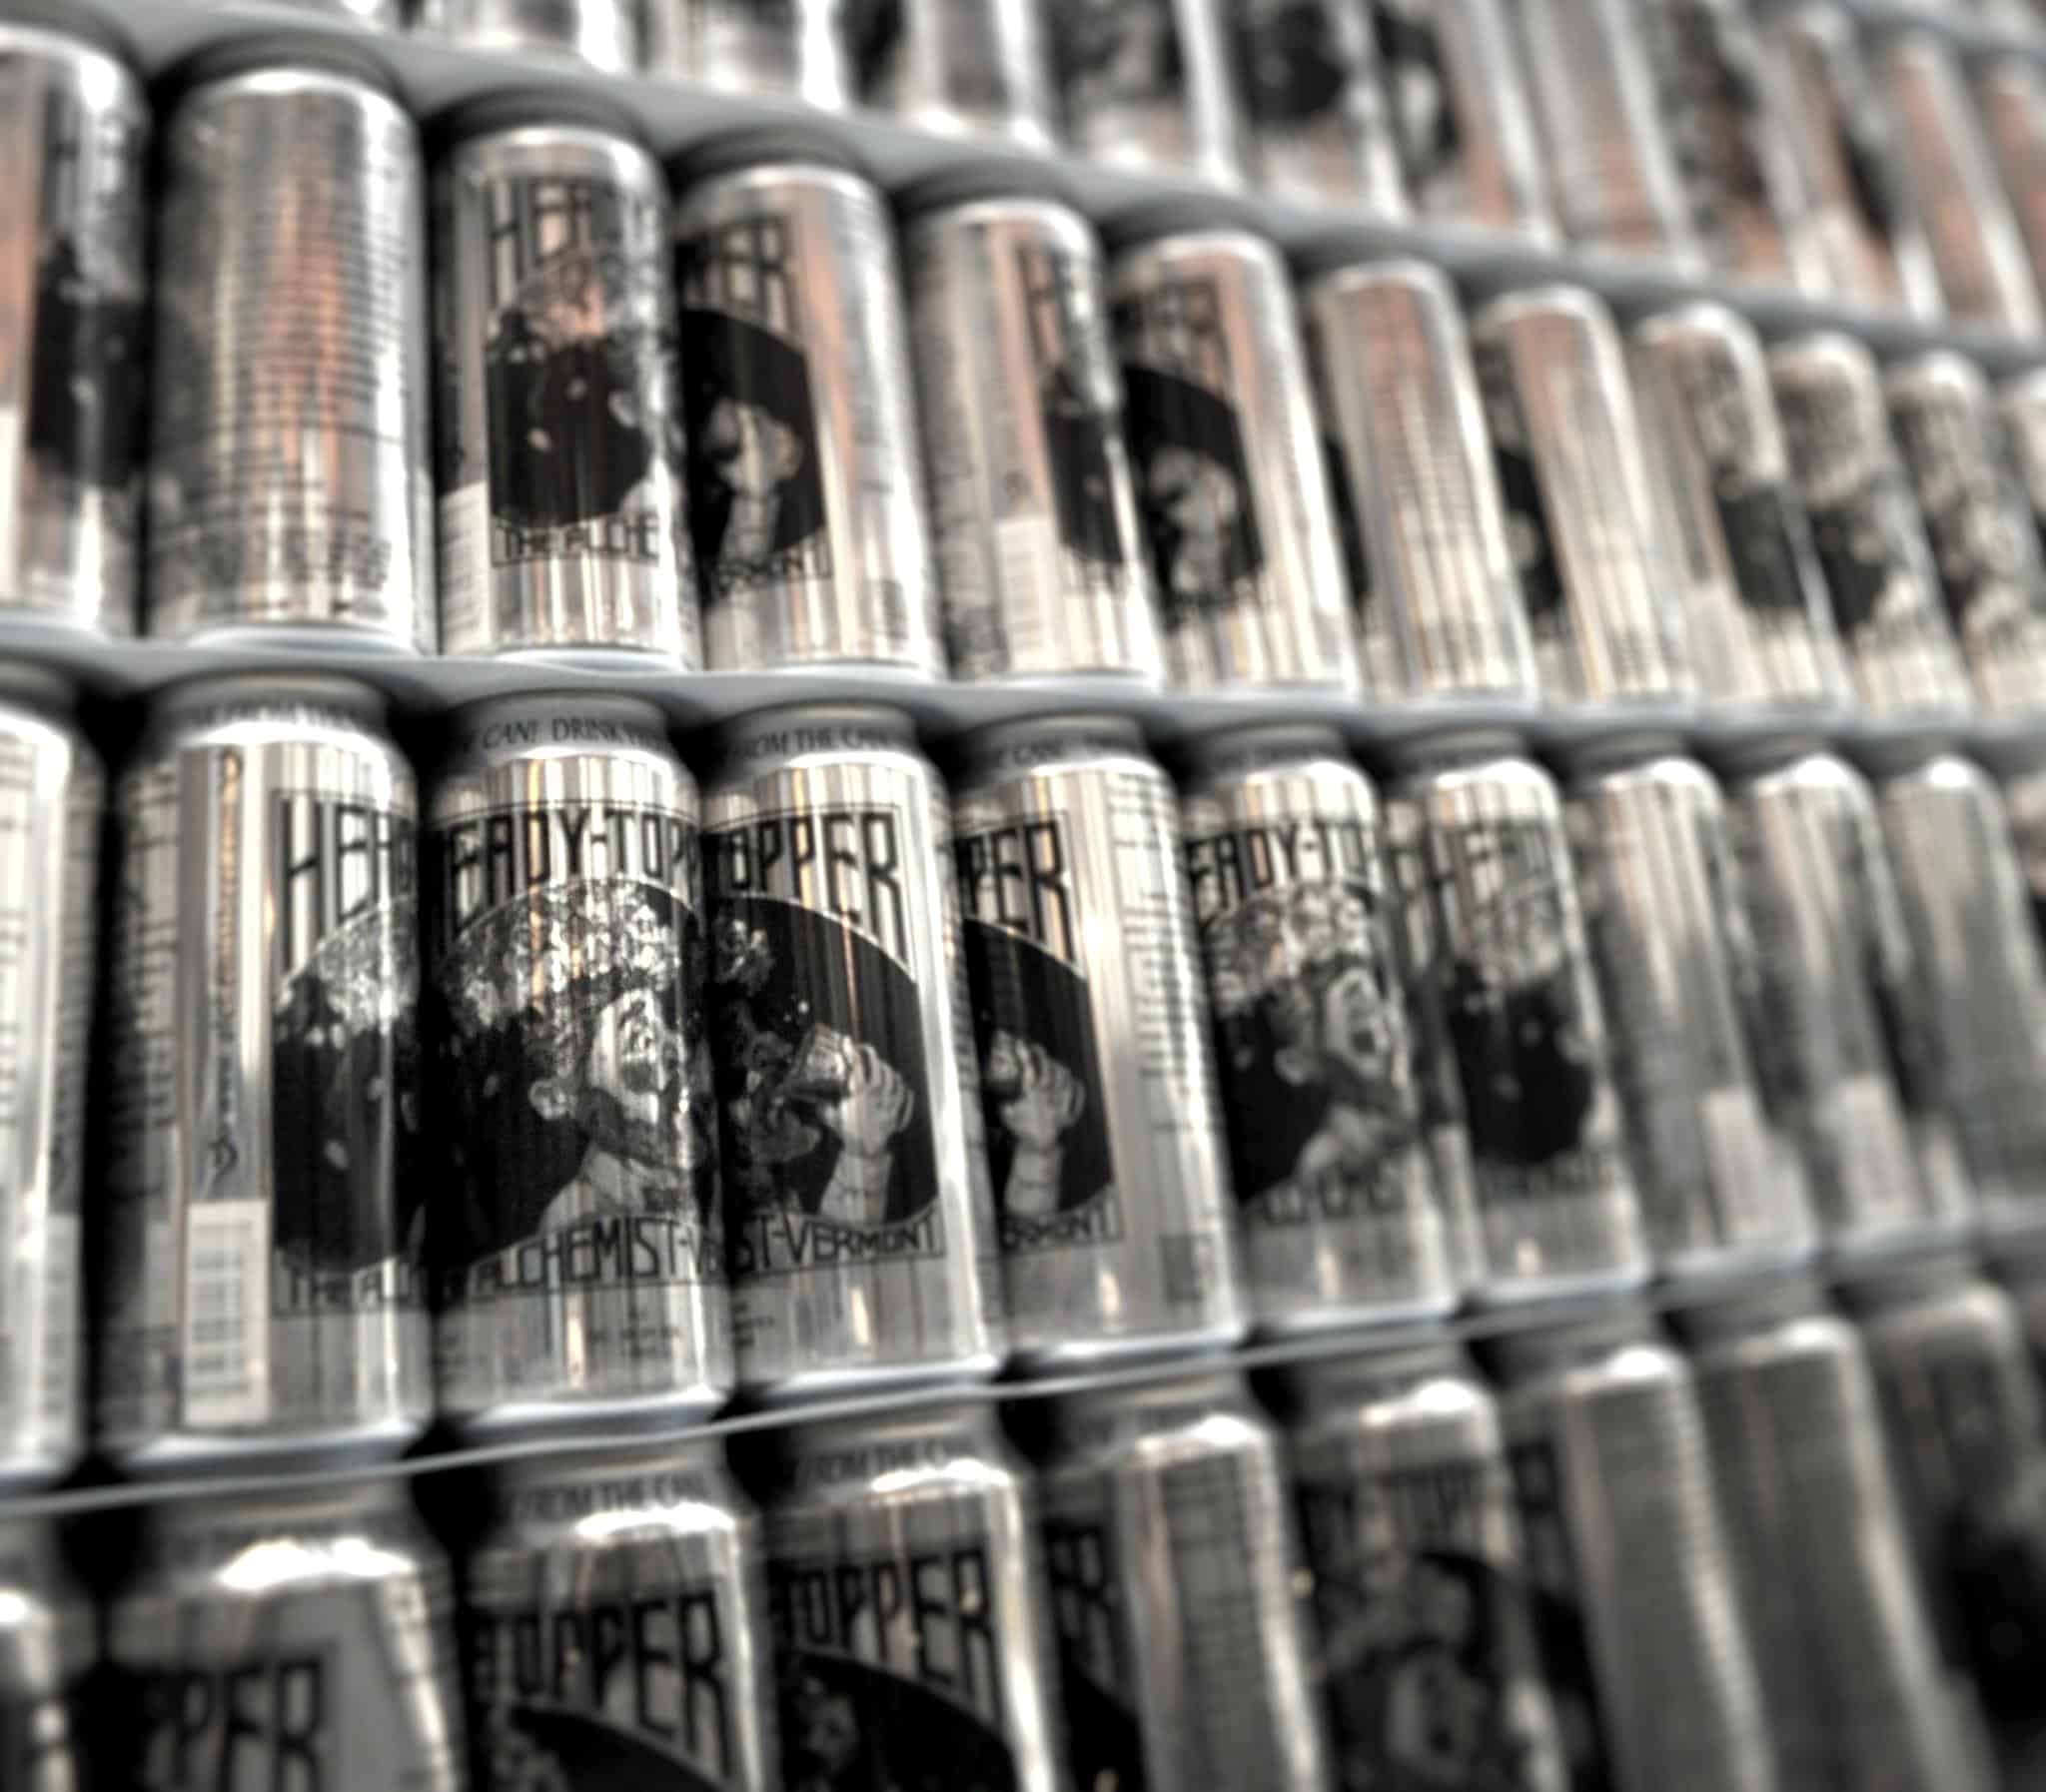 The Alchemist - Cans of Heady Topper